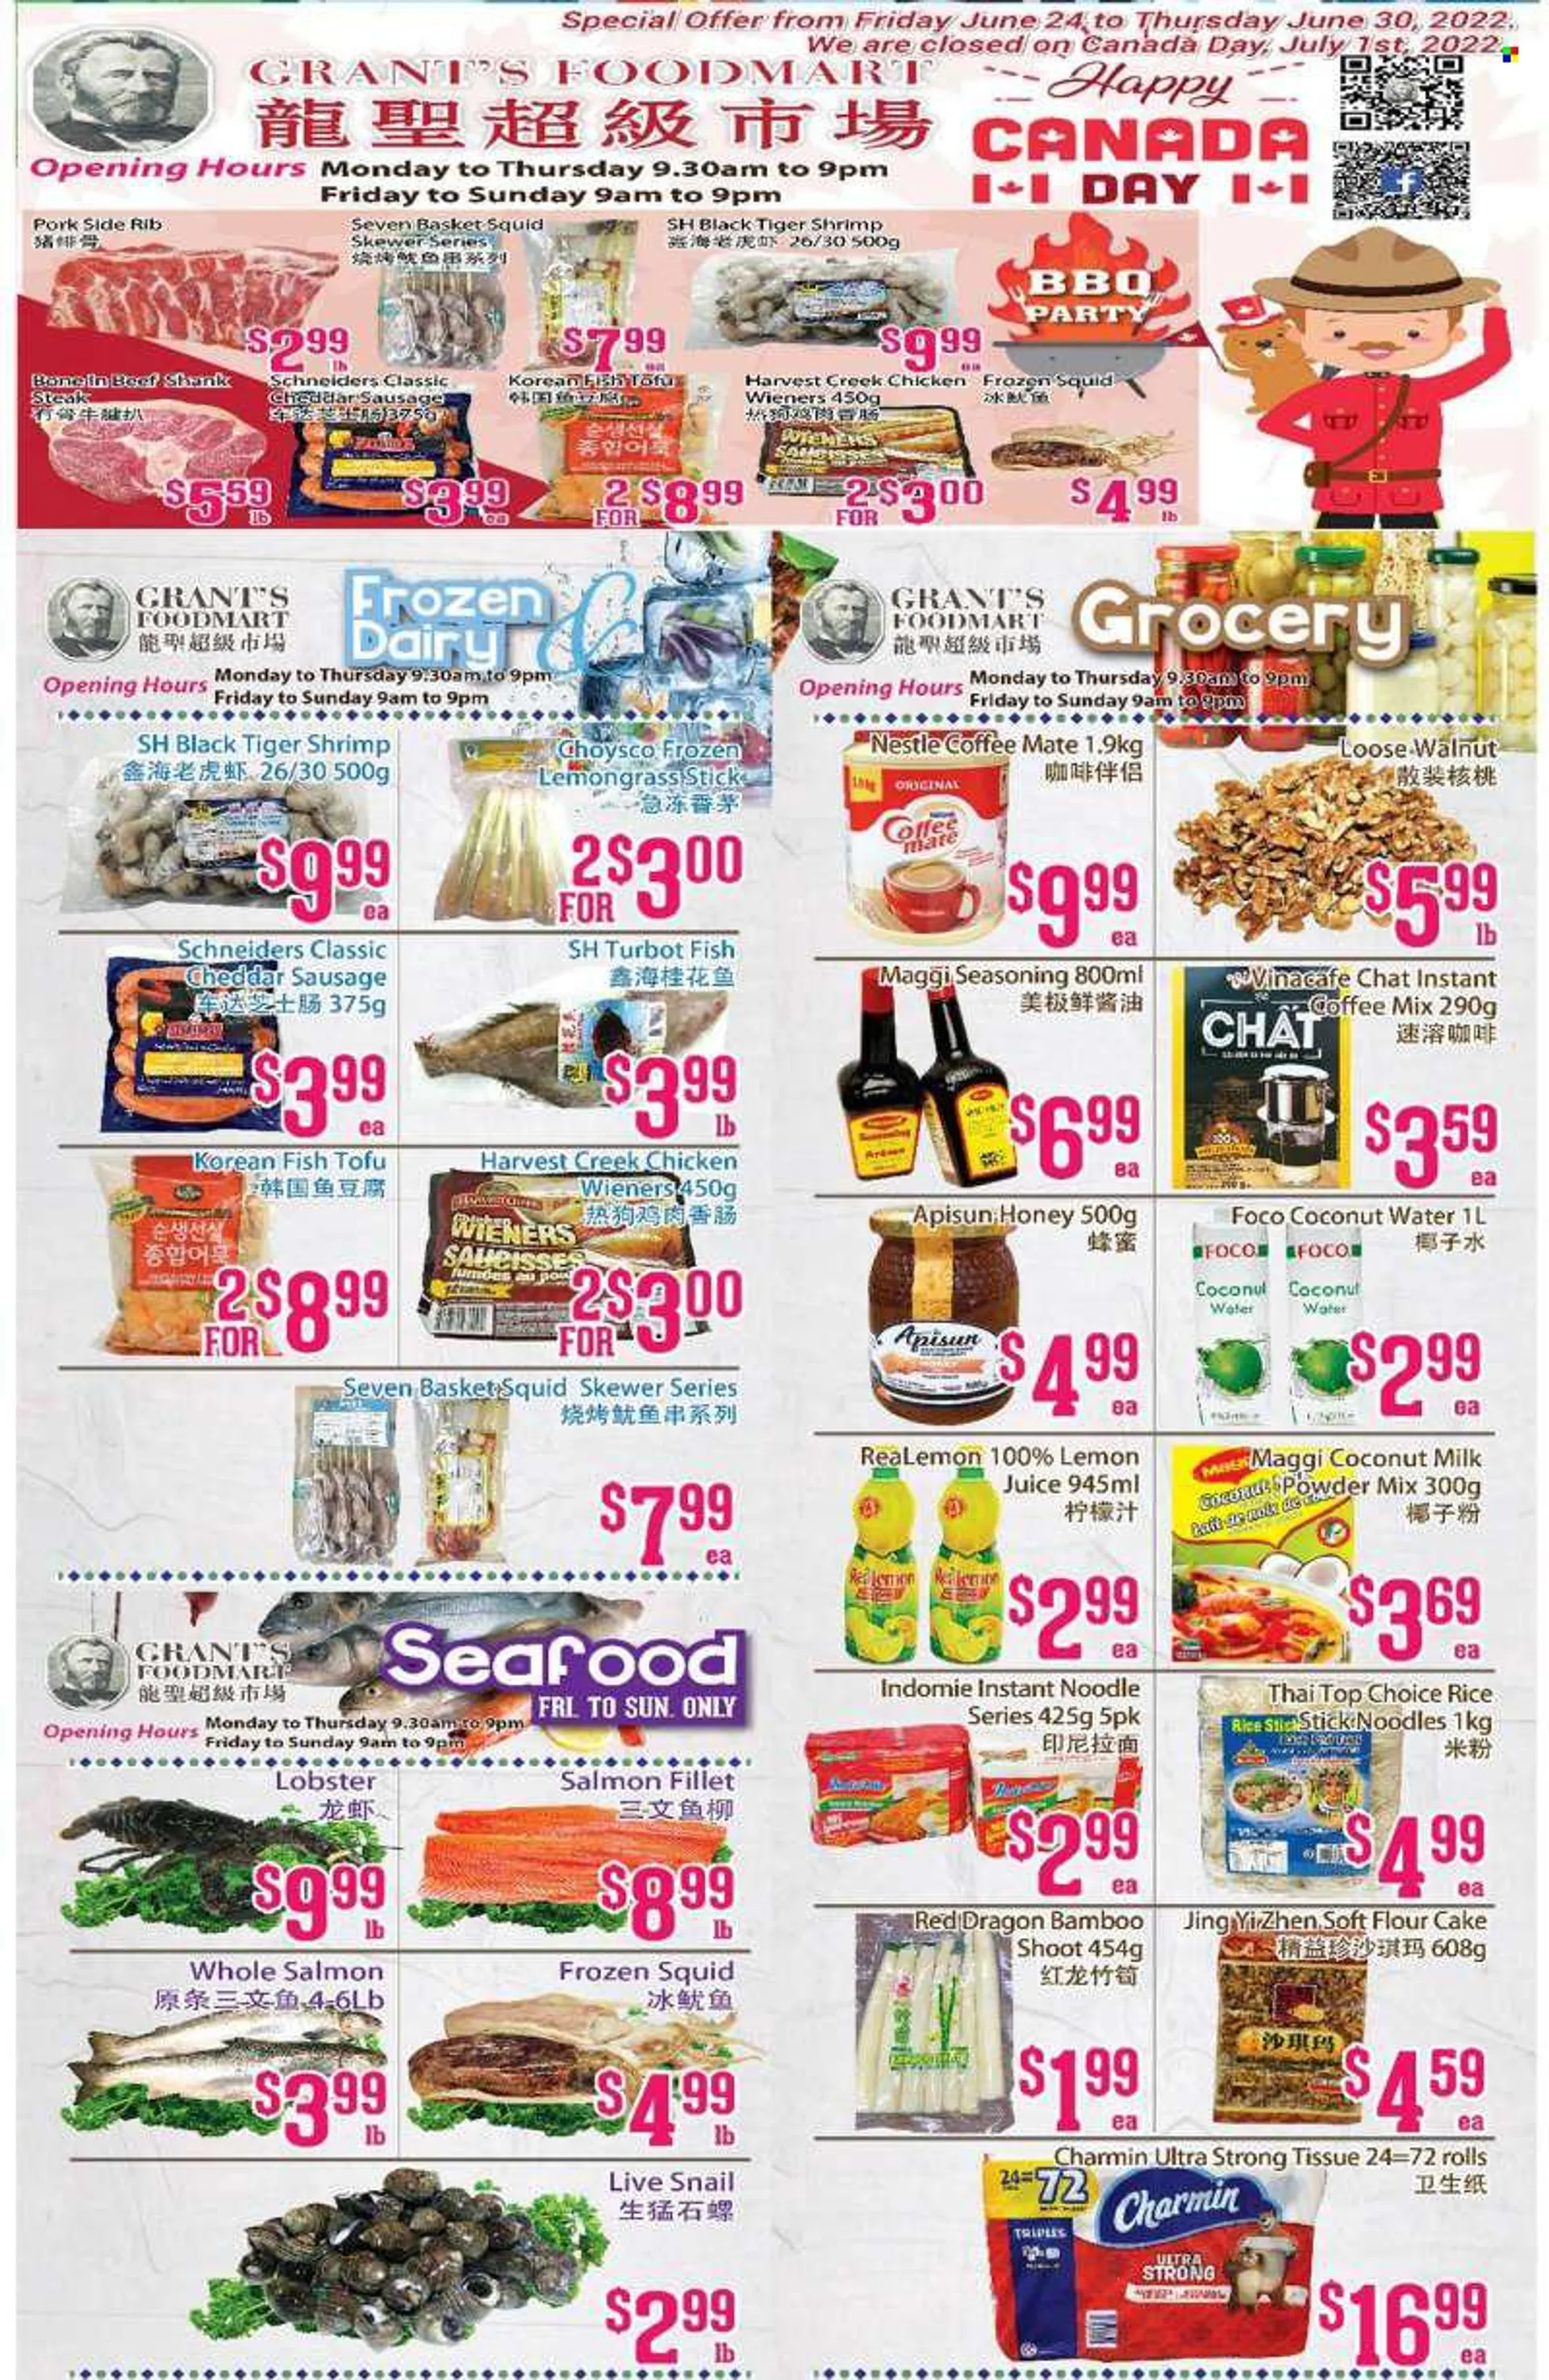 Grants Foodmart Flyer - June 24, 2022 - June 30, 2022 - Sales products - cake, lobster, salmon, salmon fillet, squid, turbot, seafood, fish, shrimps, noodles, sausage, cheddar, cheese, Coffee-Mate, flour, Maggi, coconut milk, rice, spice, honey, coconut w